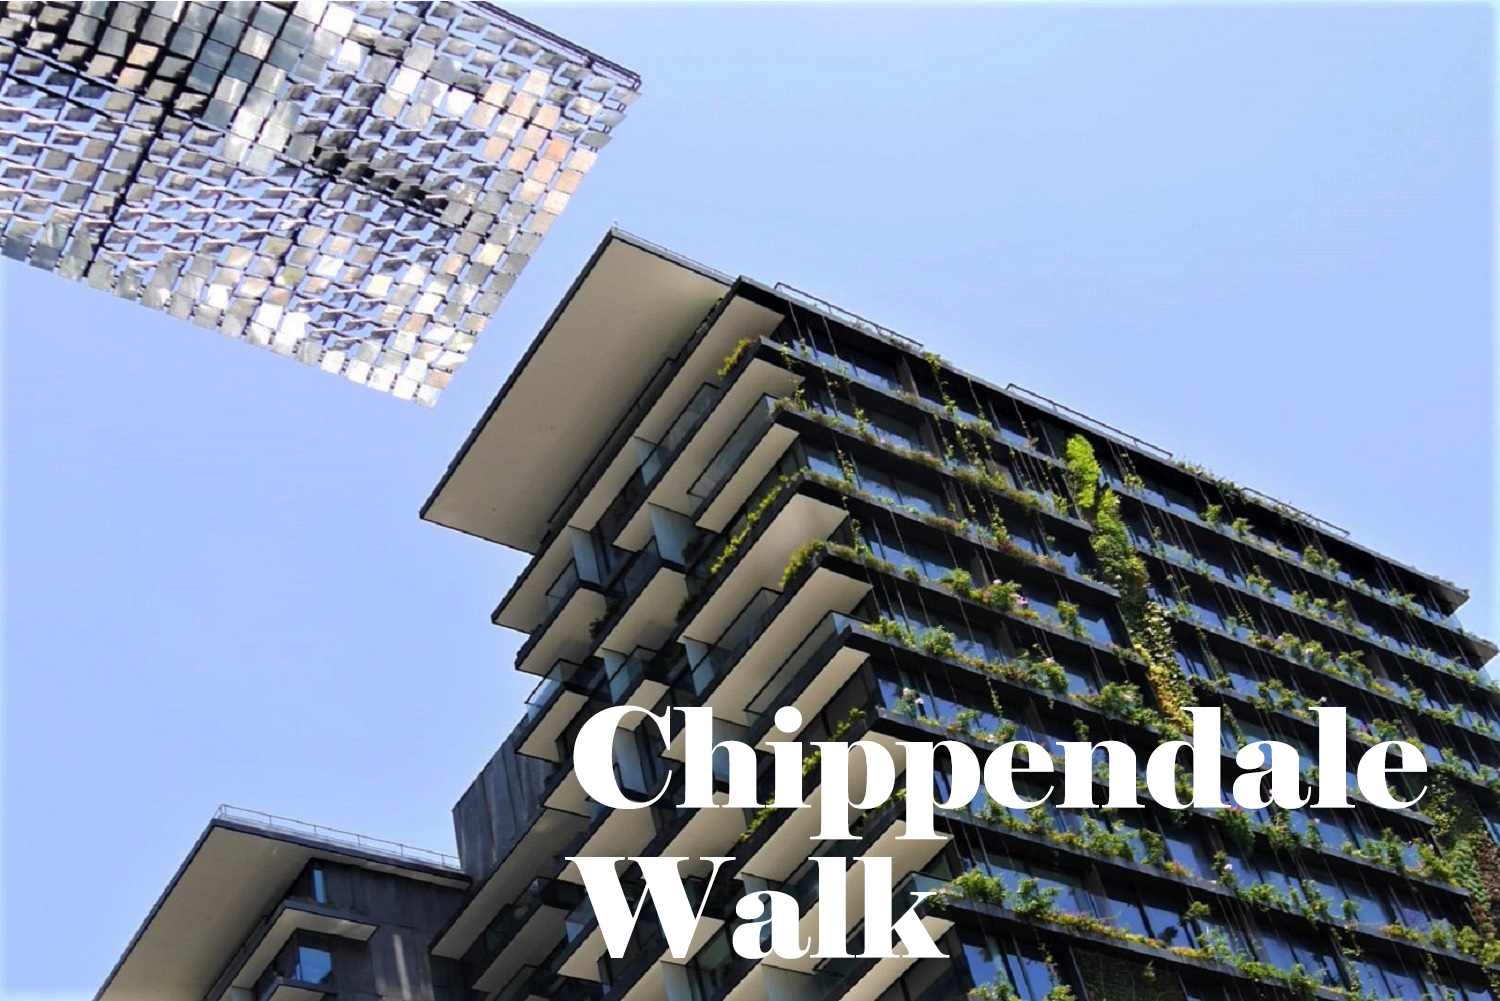 Chippendale Walk